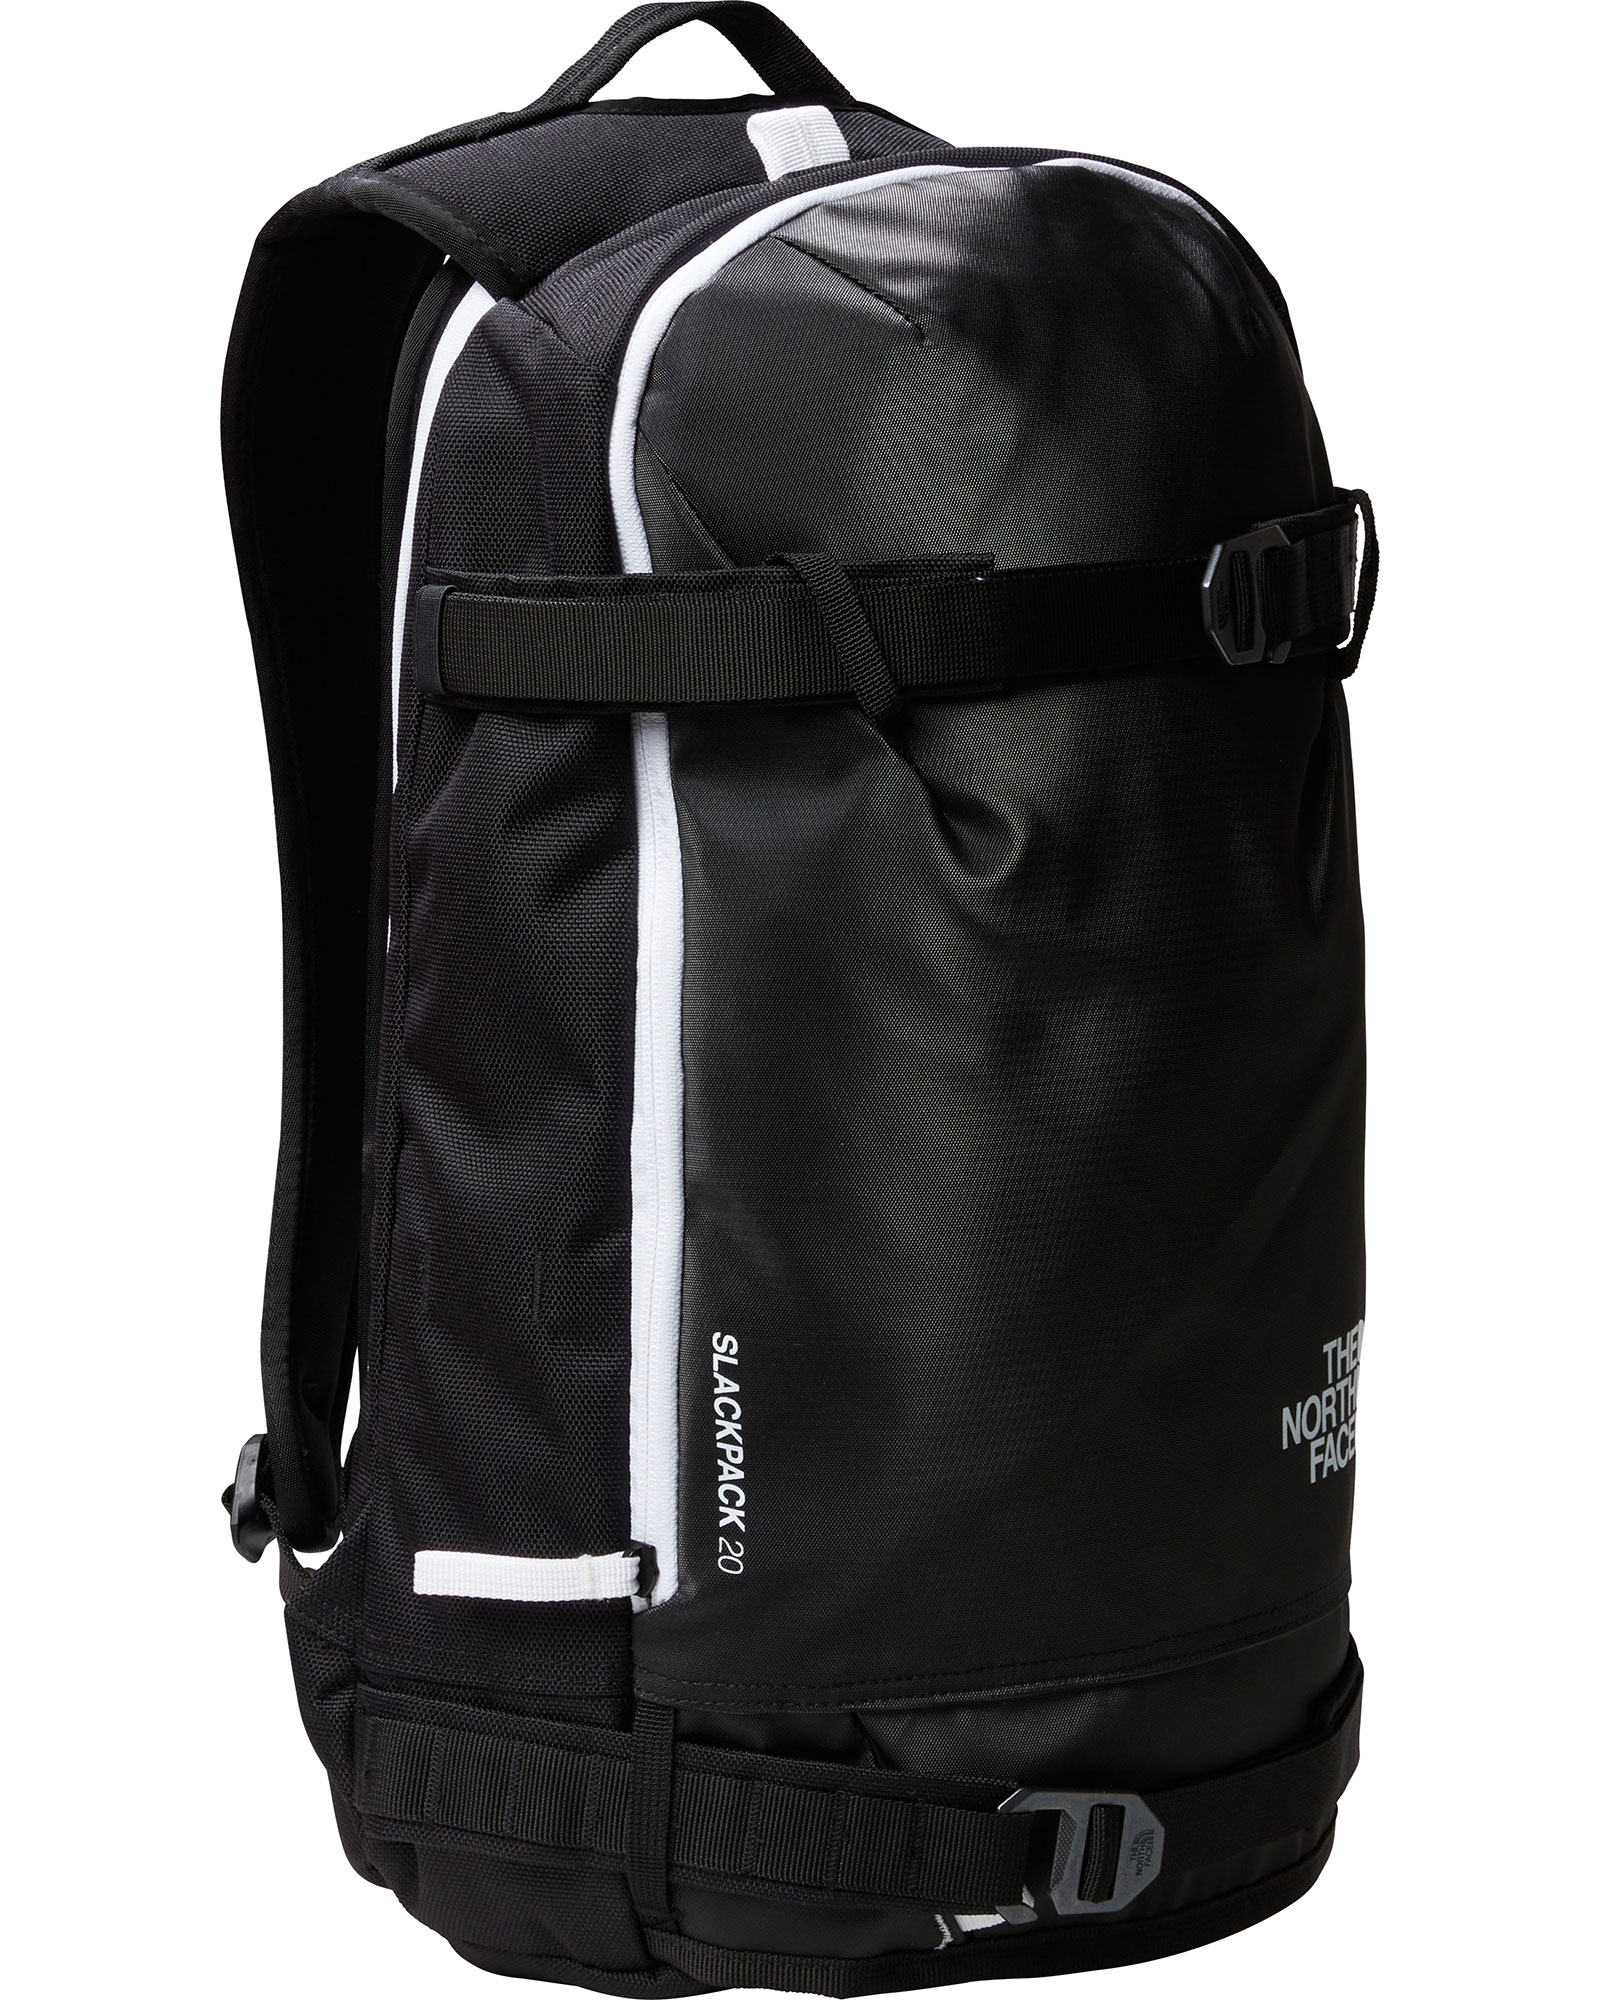 The North Face Slackpack 2.0 Expedition Backpack - TNF Black/TNF White